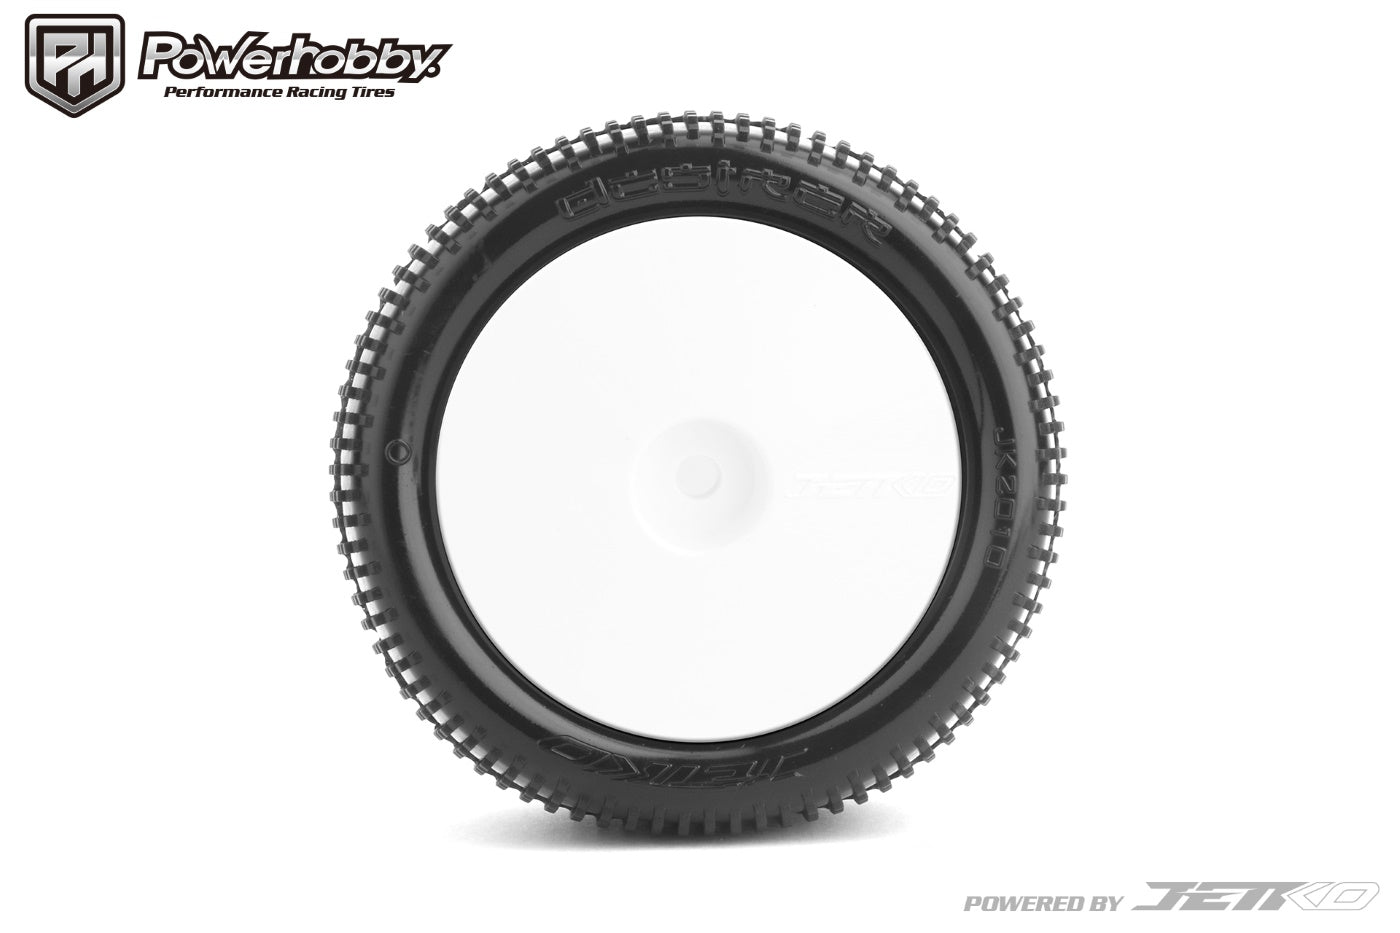 Powerhobby Desirer 1/10 Rear Buggy Clay Mounted Tires Medium Soft 2WD / 4WD.